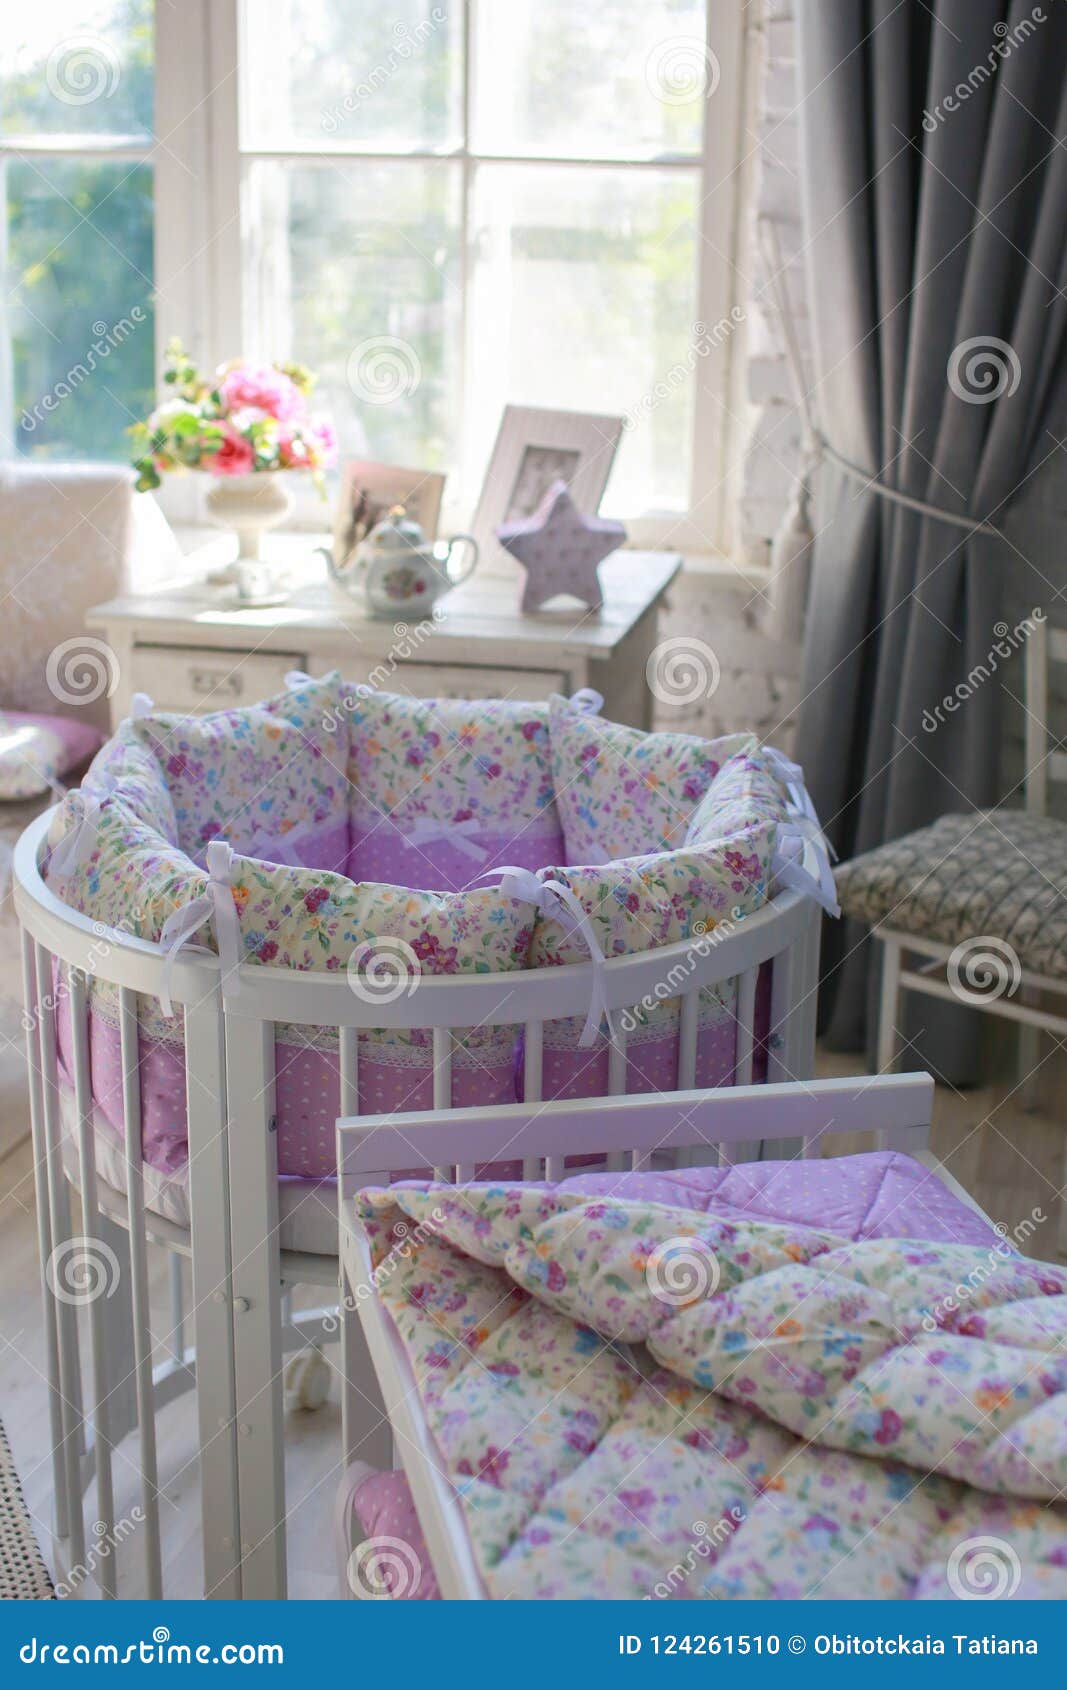 White Cribs For Babies Round Shape Stock Photo Image Of Lilac